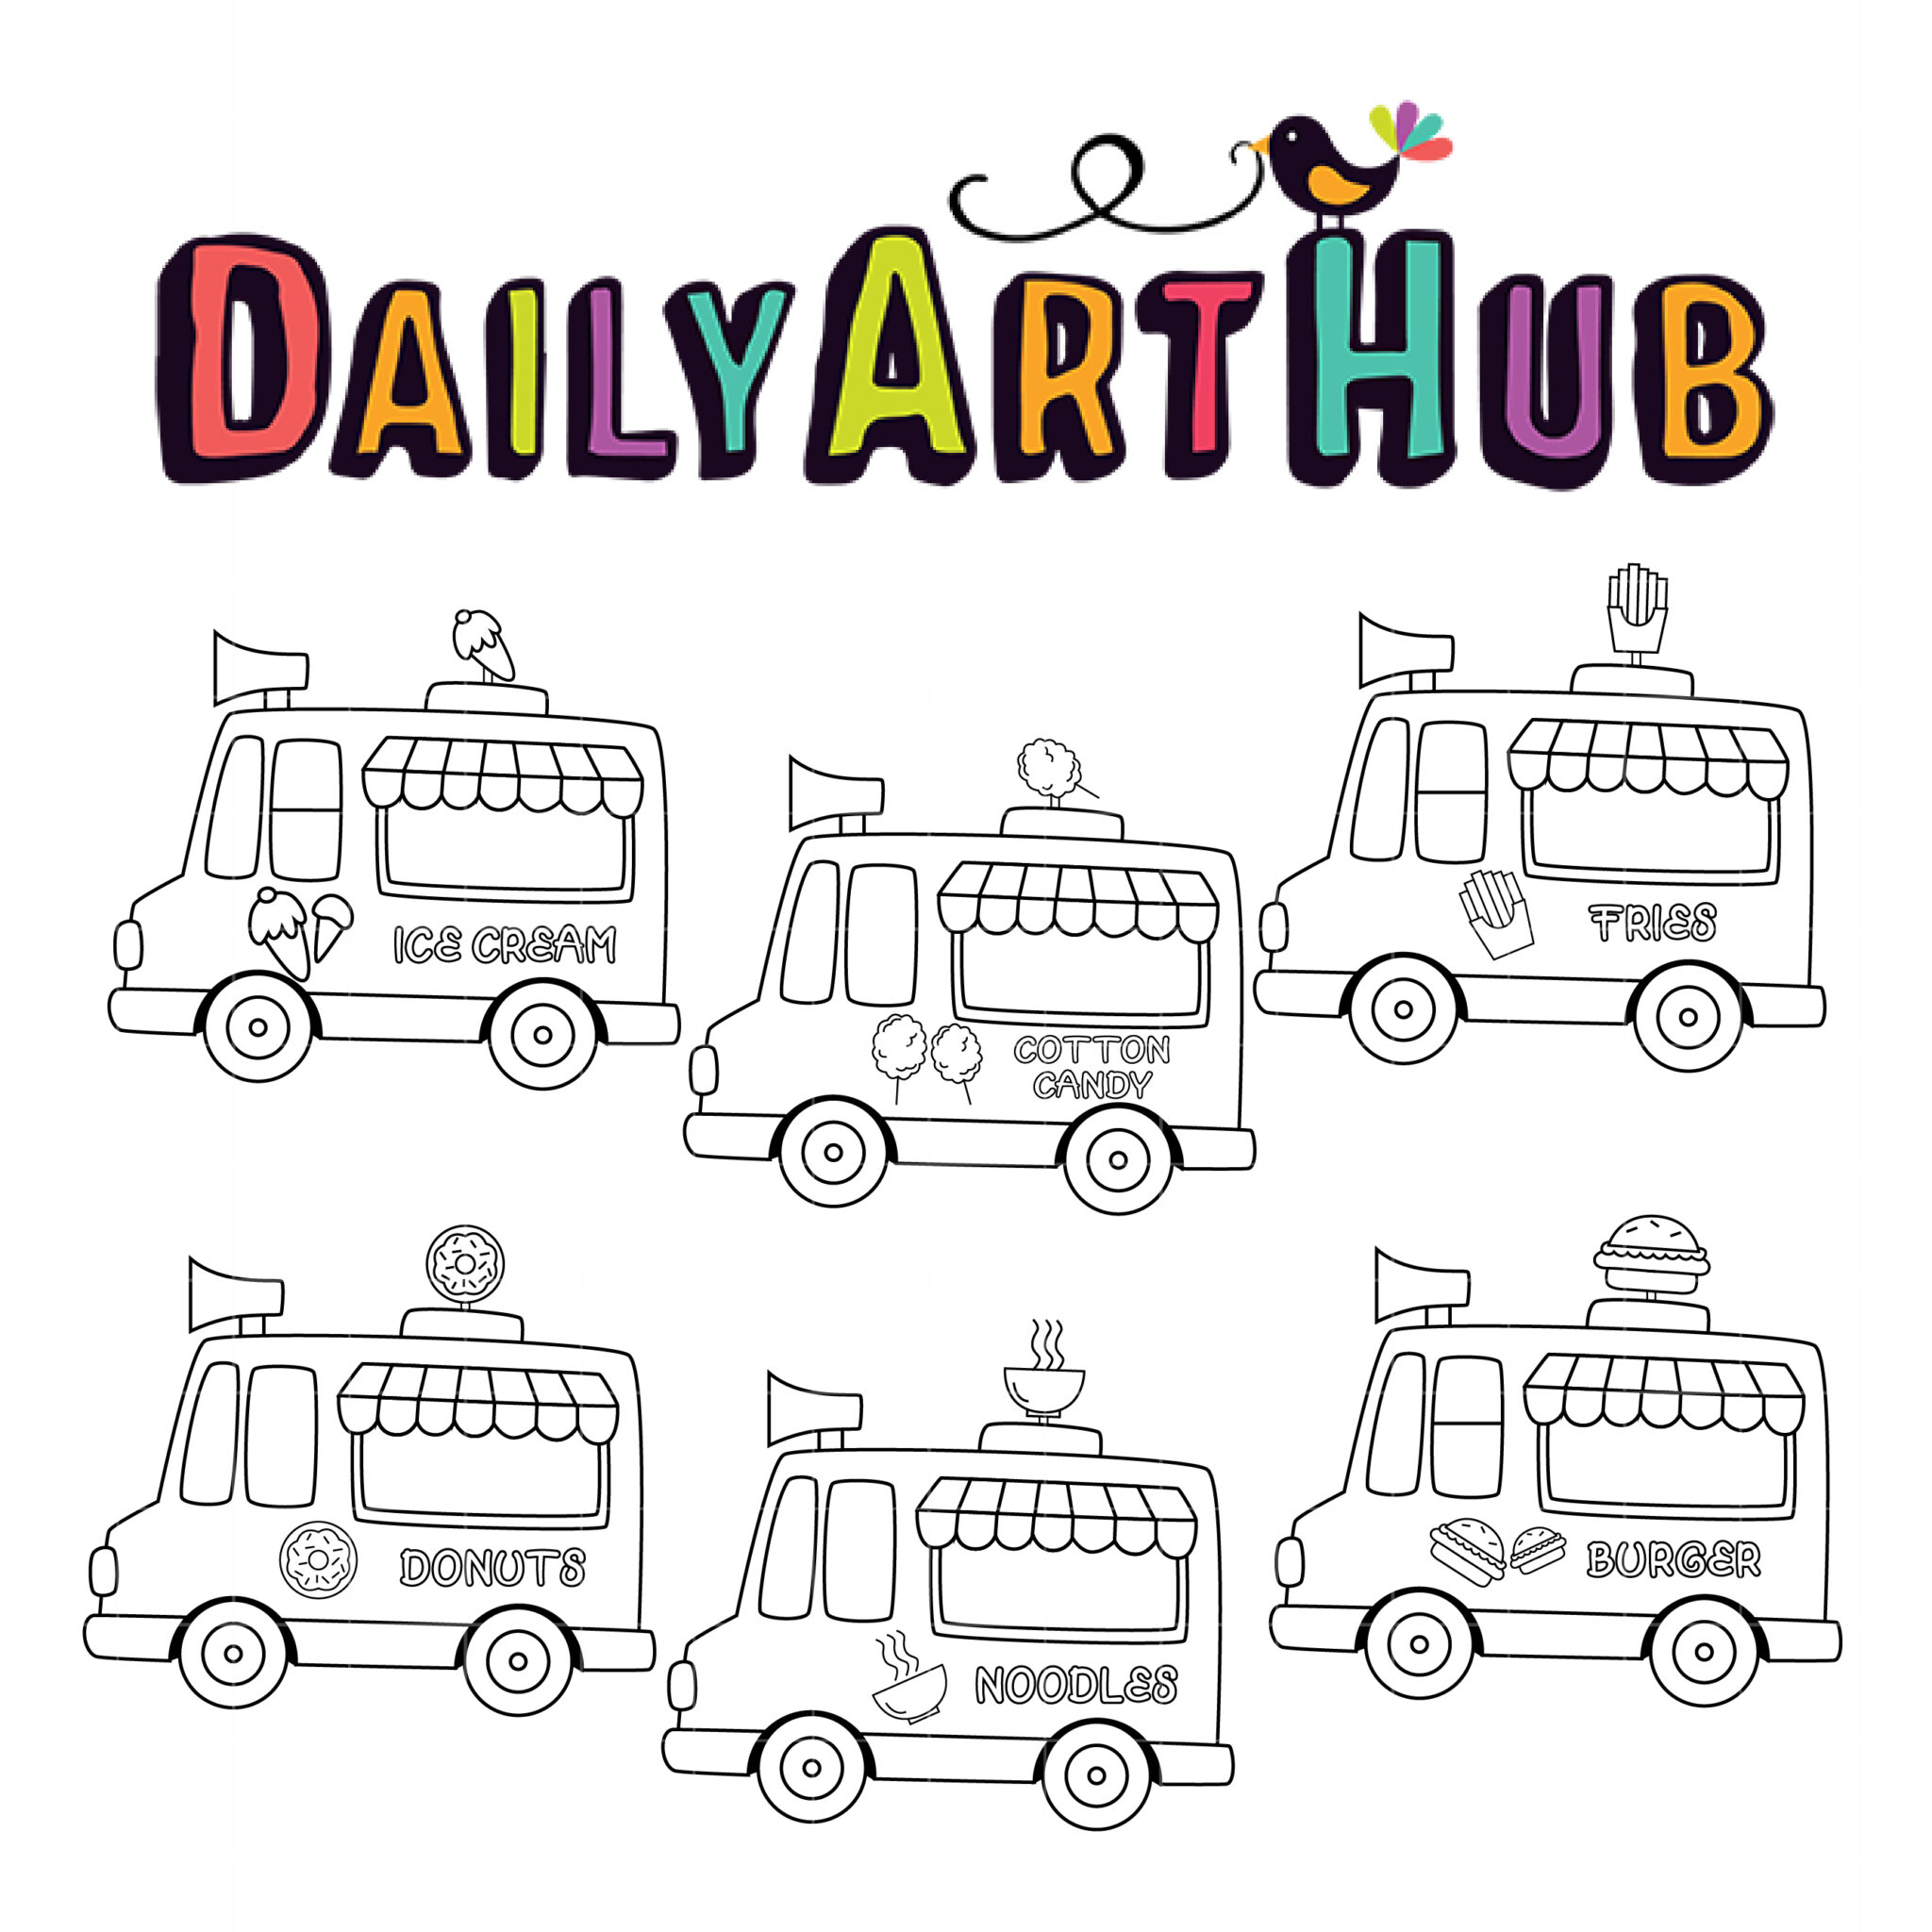 https://www.dailyarthub.com/wp-content/uploads/2020/09/Kids-Coloring-Food-Truck-1-scaled.jpg